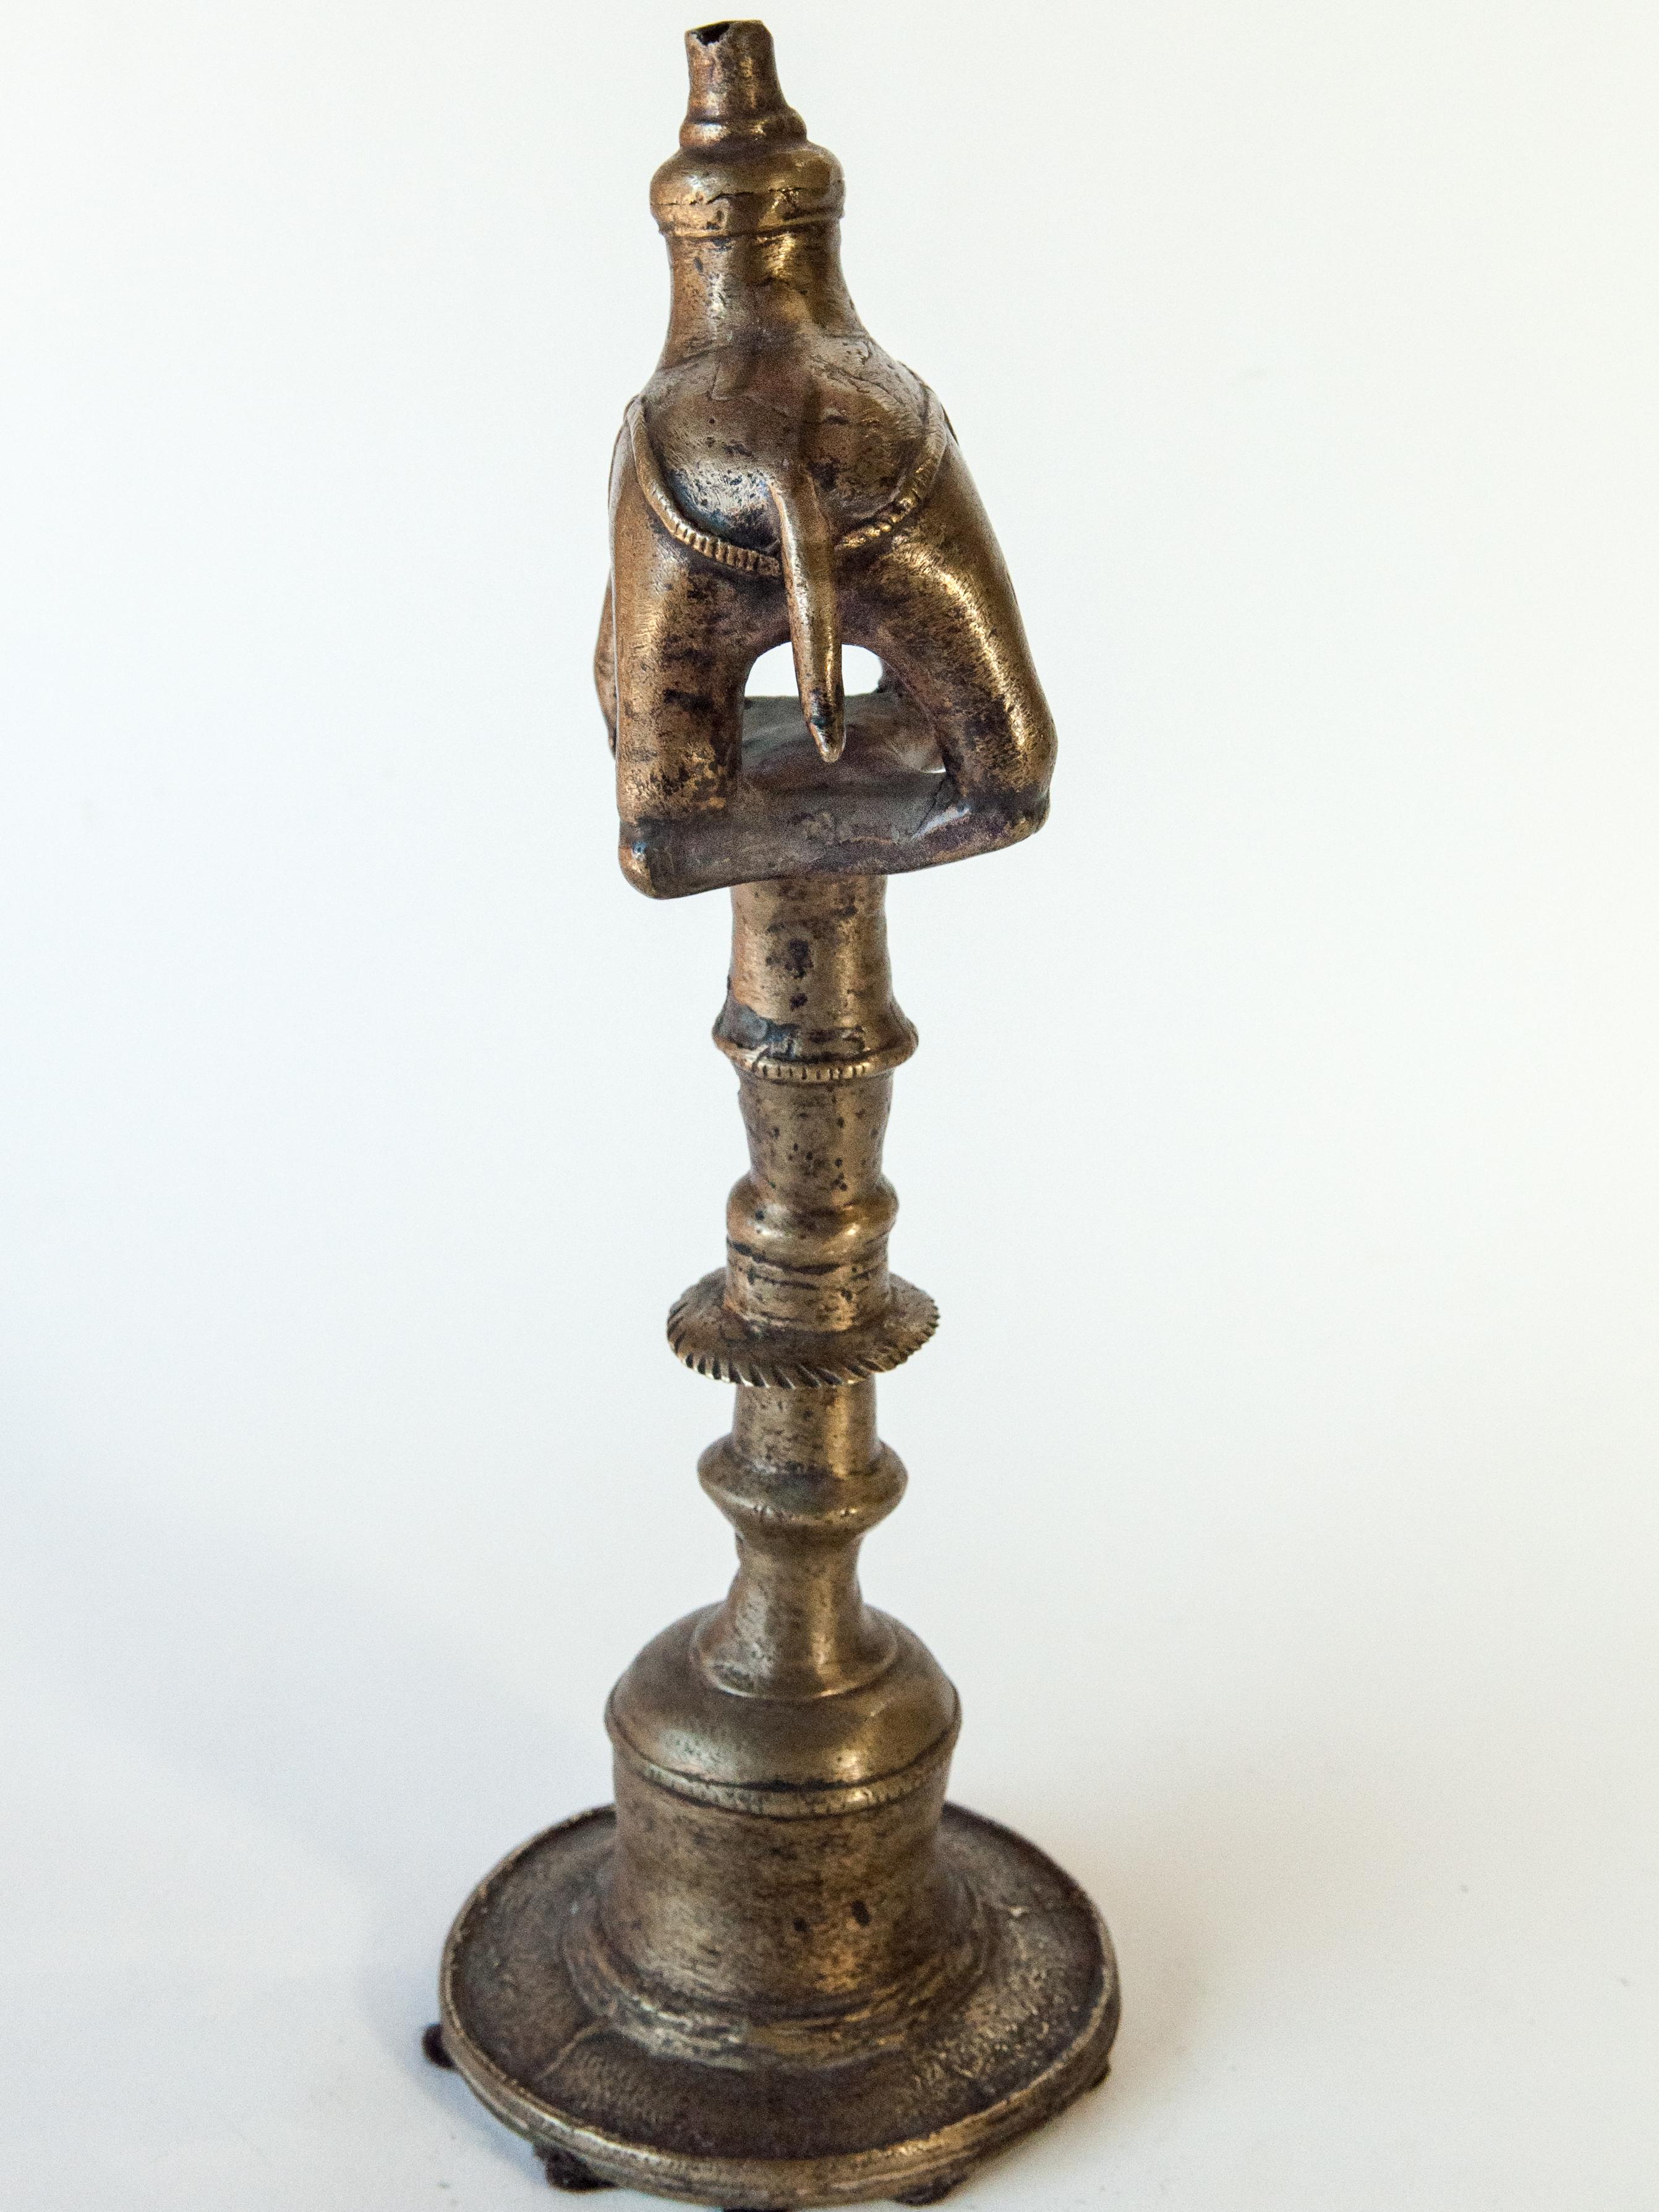 Nepalese Vintage Bronze Oil Lamp with Elephant Motif, Rural Nepal, Mid-Late 20th Century